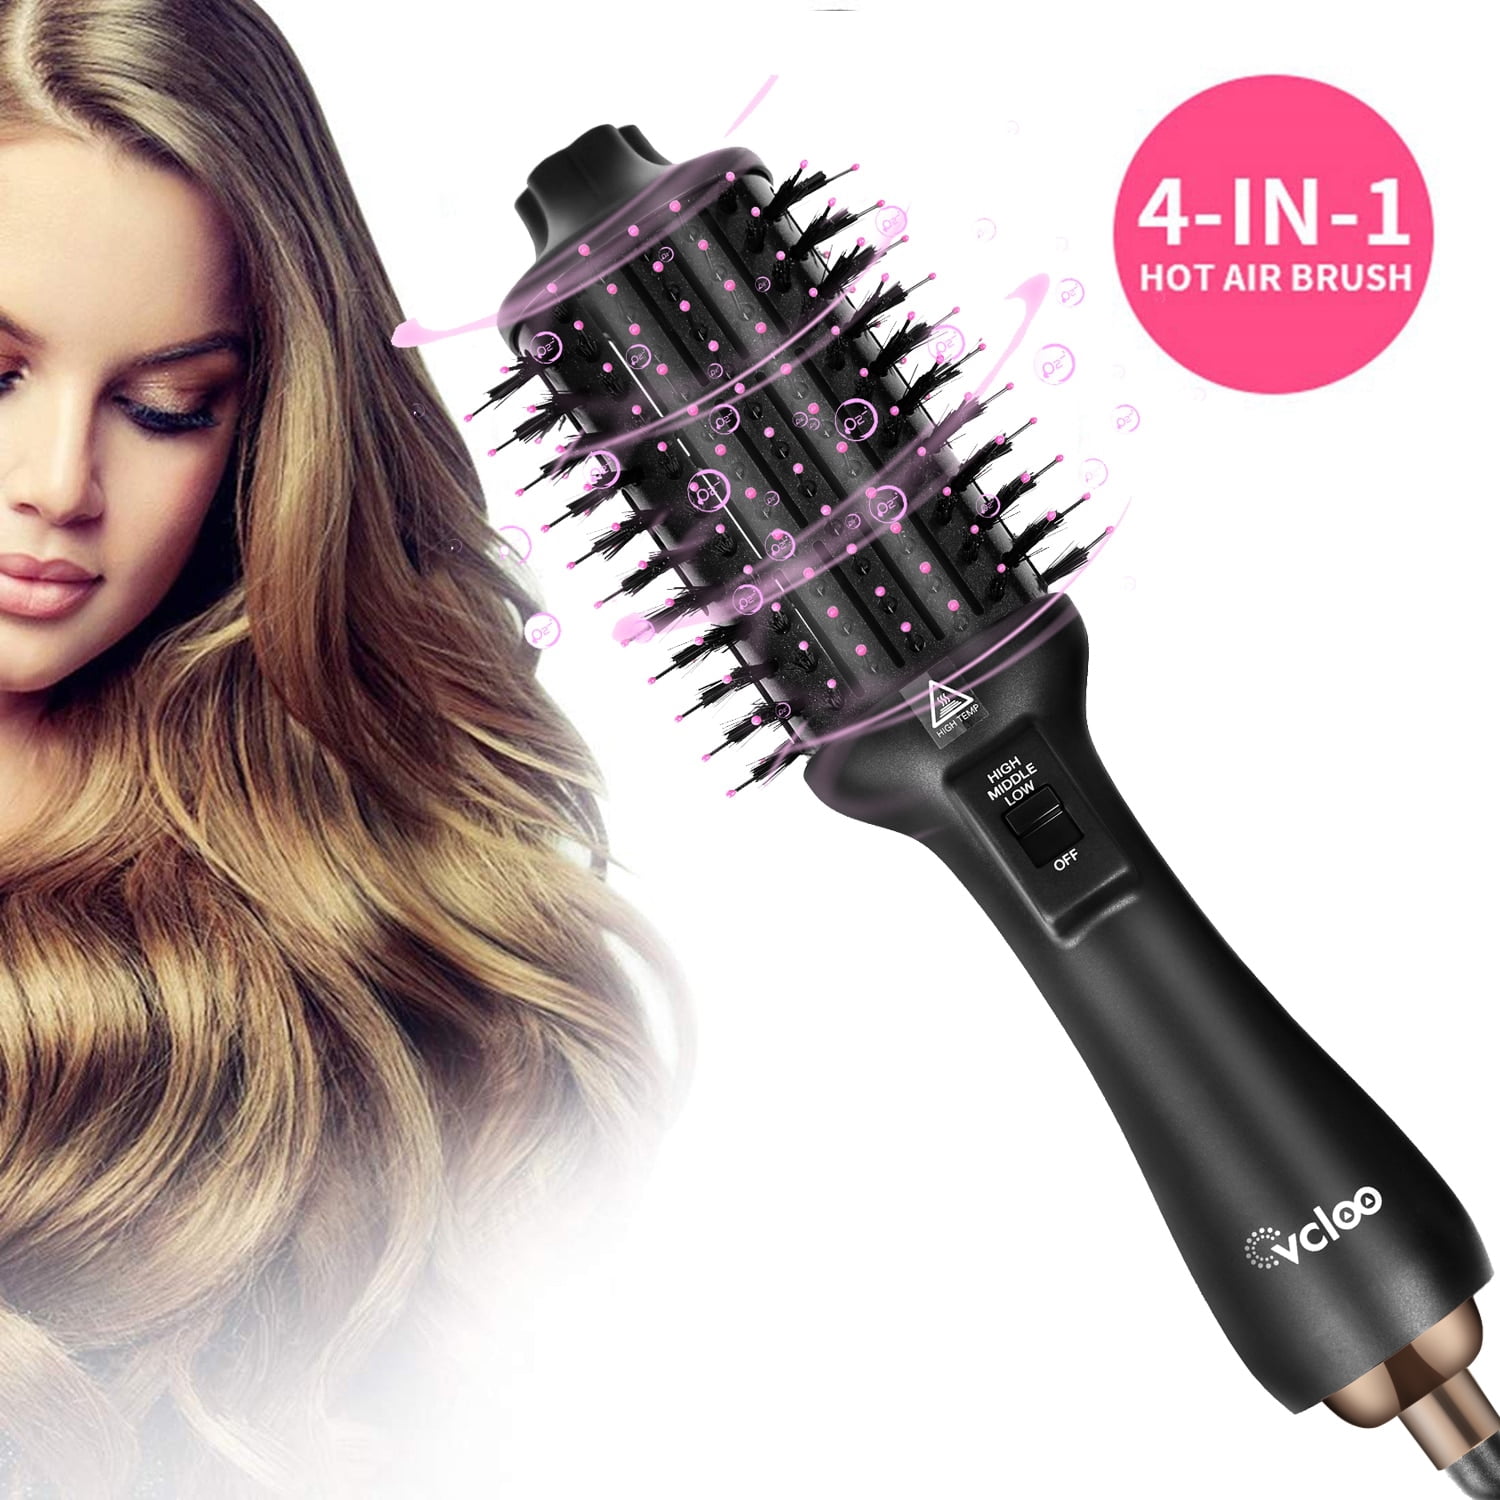 Hair Dryer Brush, Hot Air Brush, One-Step Hair Dryer And Volumizer, 4 in 1  Blow Dryer Styler,Negative Ion Ceramic Hot Air Brush Comb for Rotating  Straightening Curling - Walmart.com